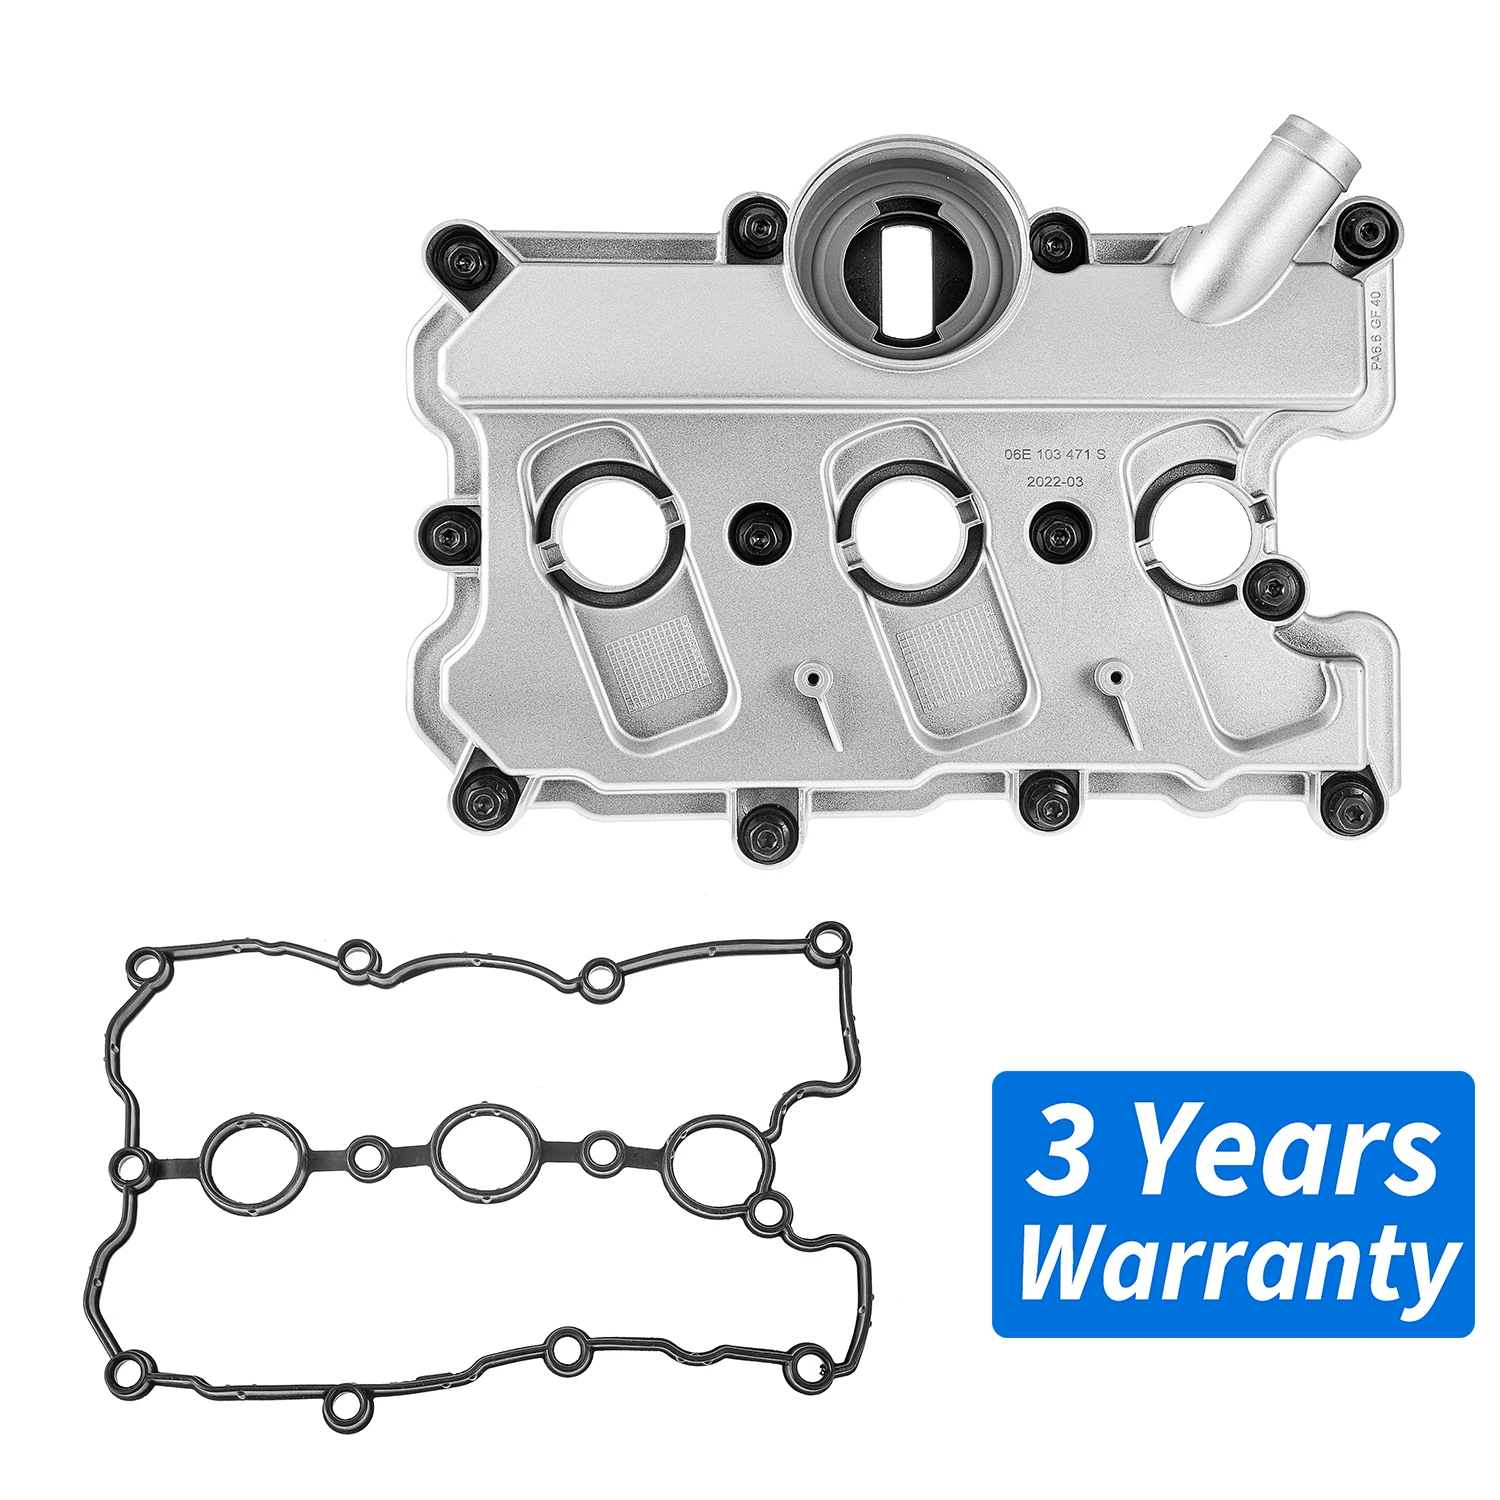 

Engine Left Cylinder Head Valve Cover with Gasket＆bolts 06E103471S For AUDI A4 B8,A5/S5 ,A6 C7,A8L D4,Q7 3.0TFSI/VW Phideon 3.0T